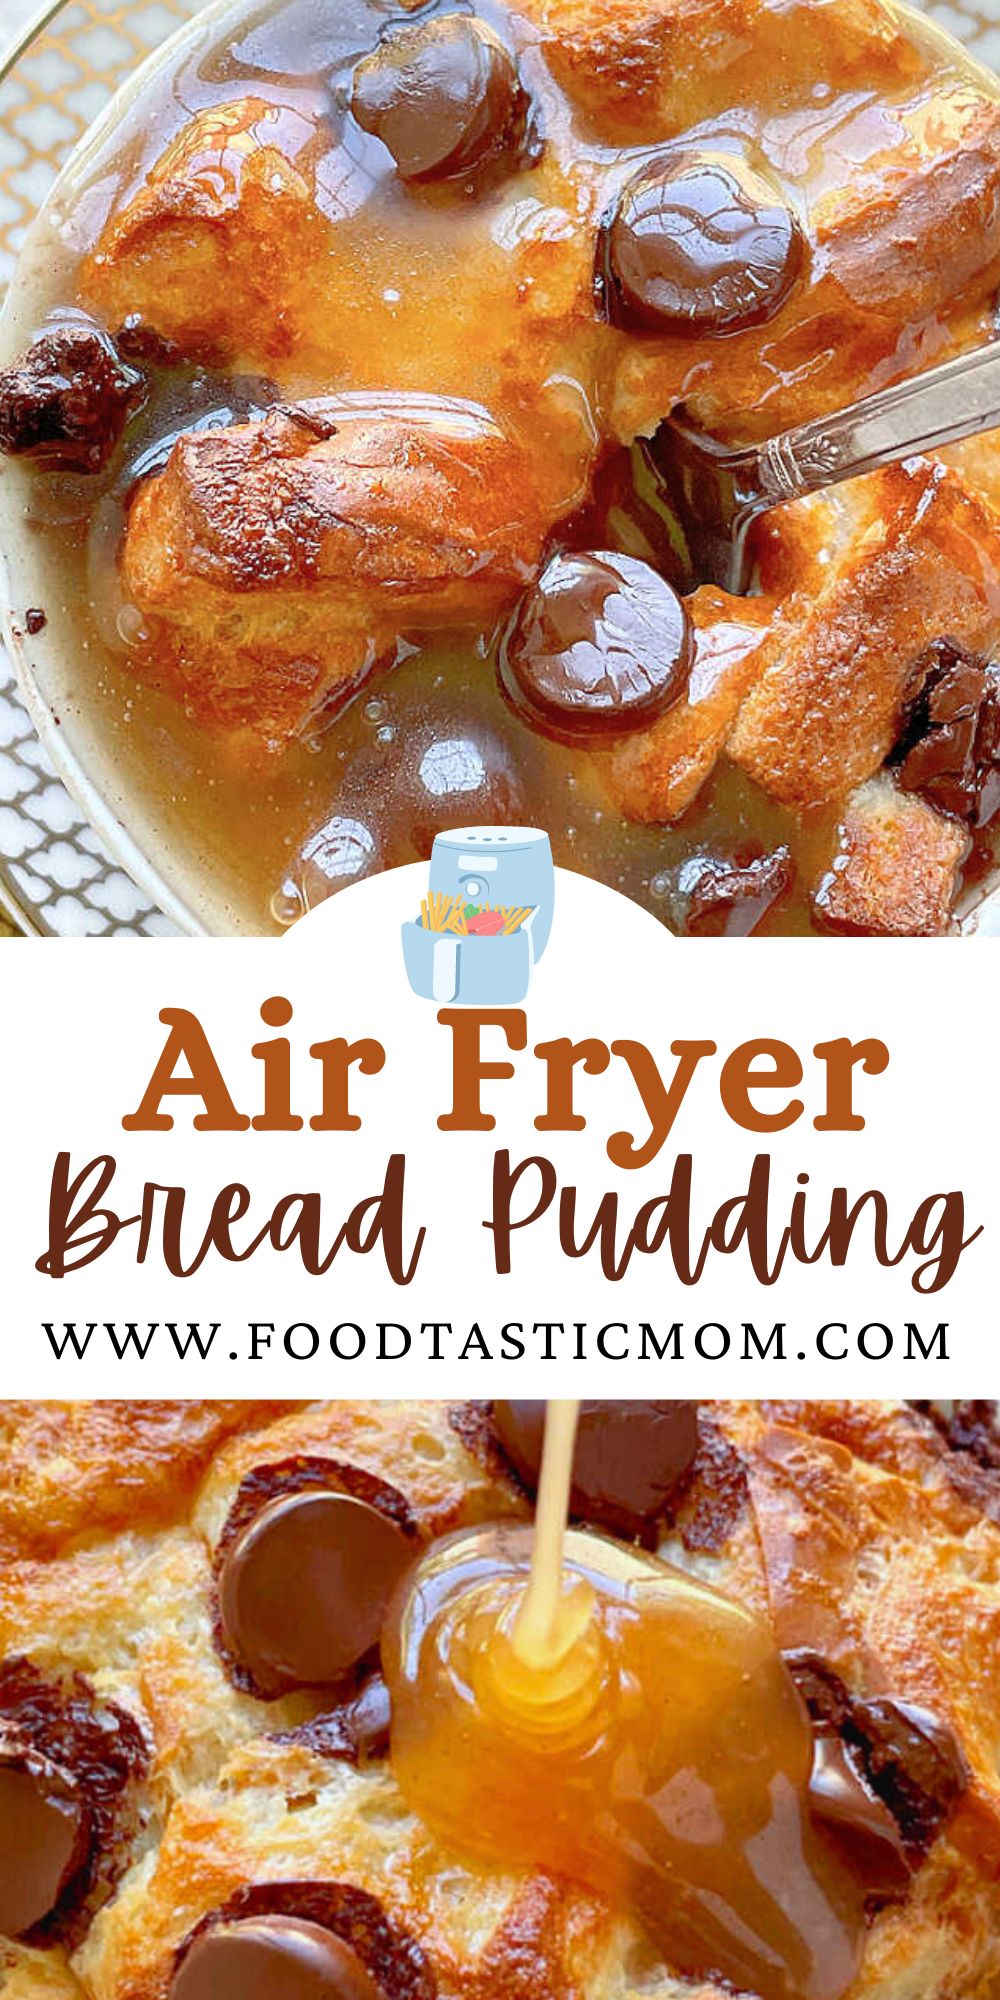 Air Fryer Bread Pudding is a decadent dessert. A soufflé like combination of bread and chocolate drenched in bourbon butter sauce. via @foodtasticmom